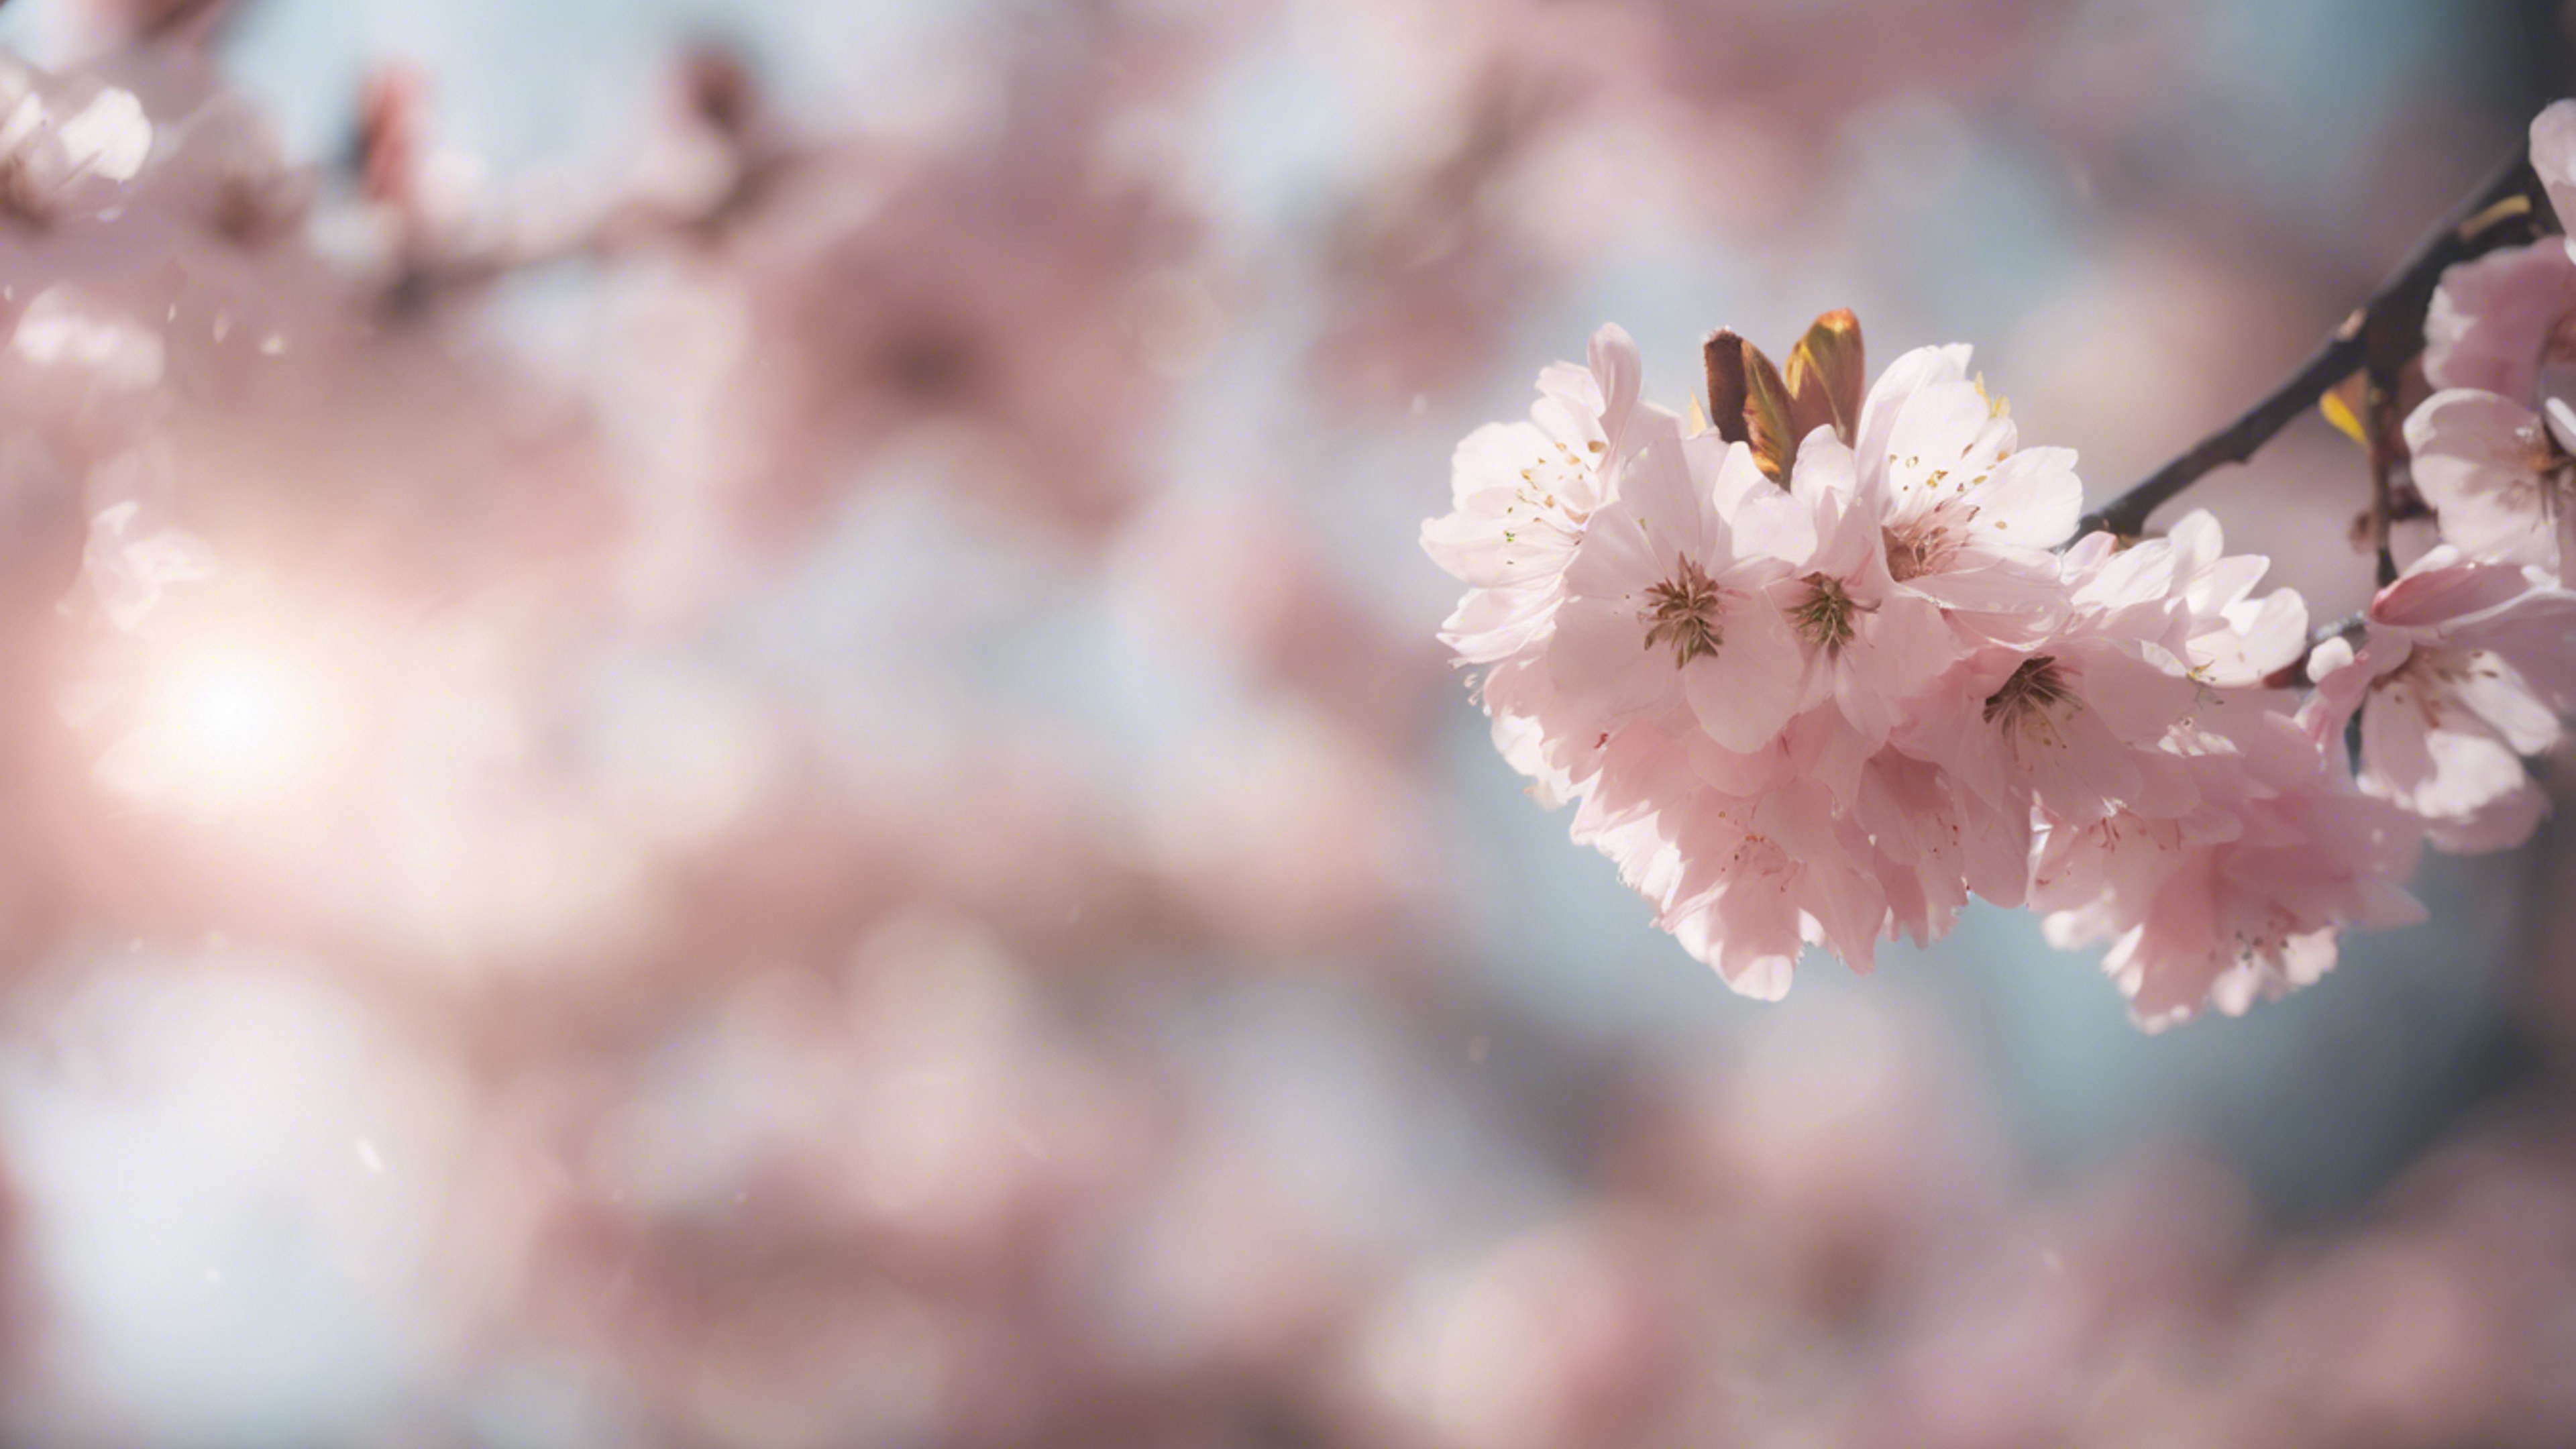 An ethereal dreamscape featuring cherry blossoms wafting in the soft spring breeze. Hình nền[9de2e4f1deeb467ebab6]